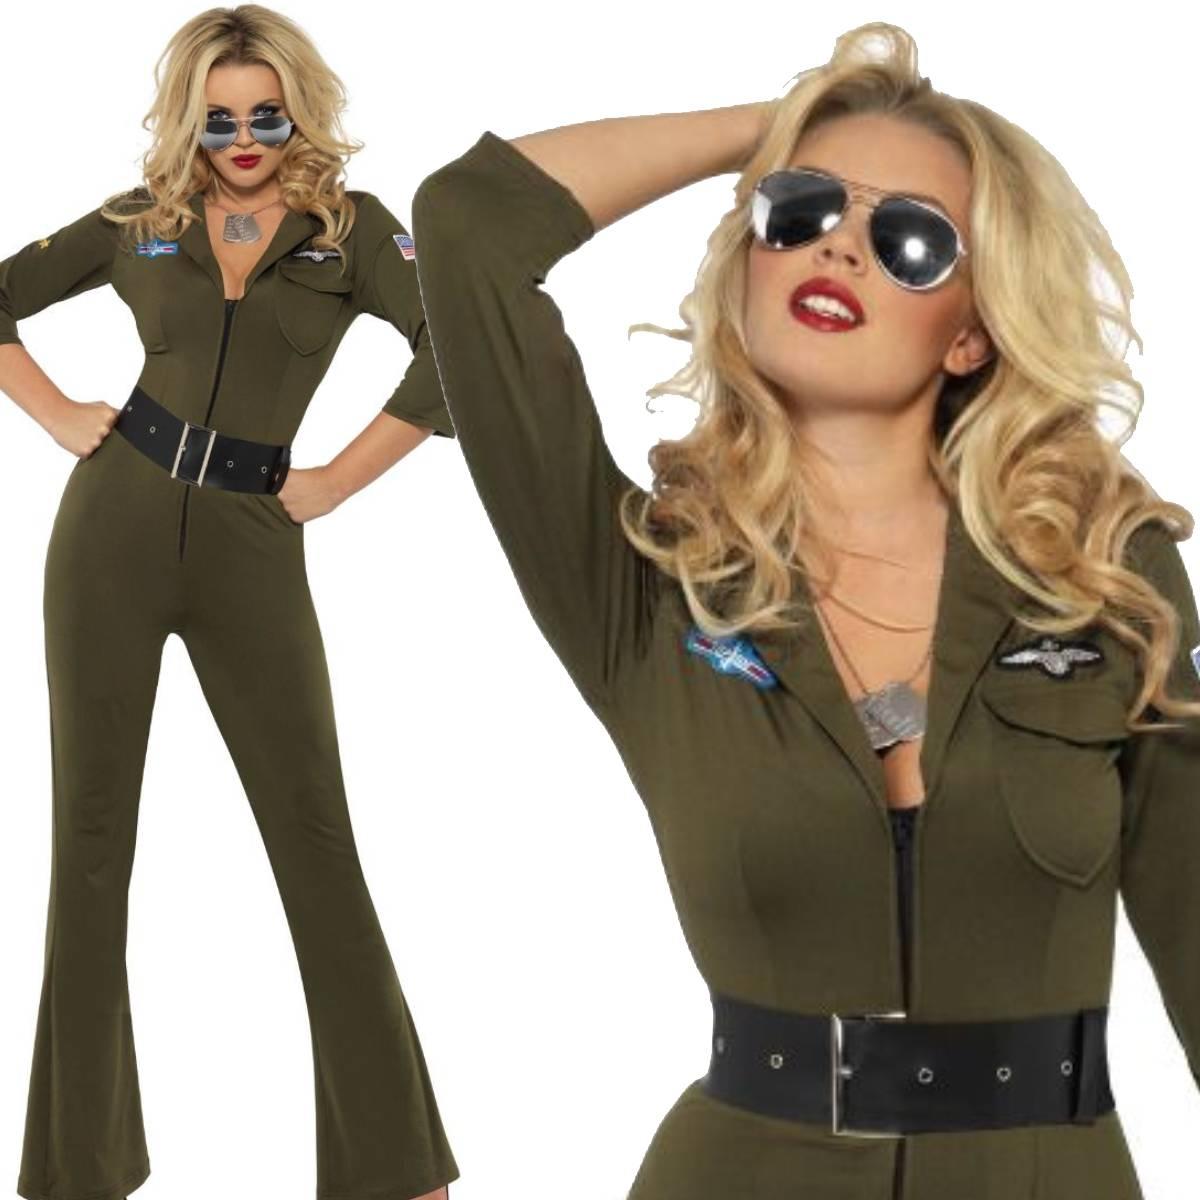 Top Gun Costume for Women by Smiffys 32811 available here at Karnival Costumes online party shop